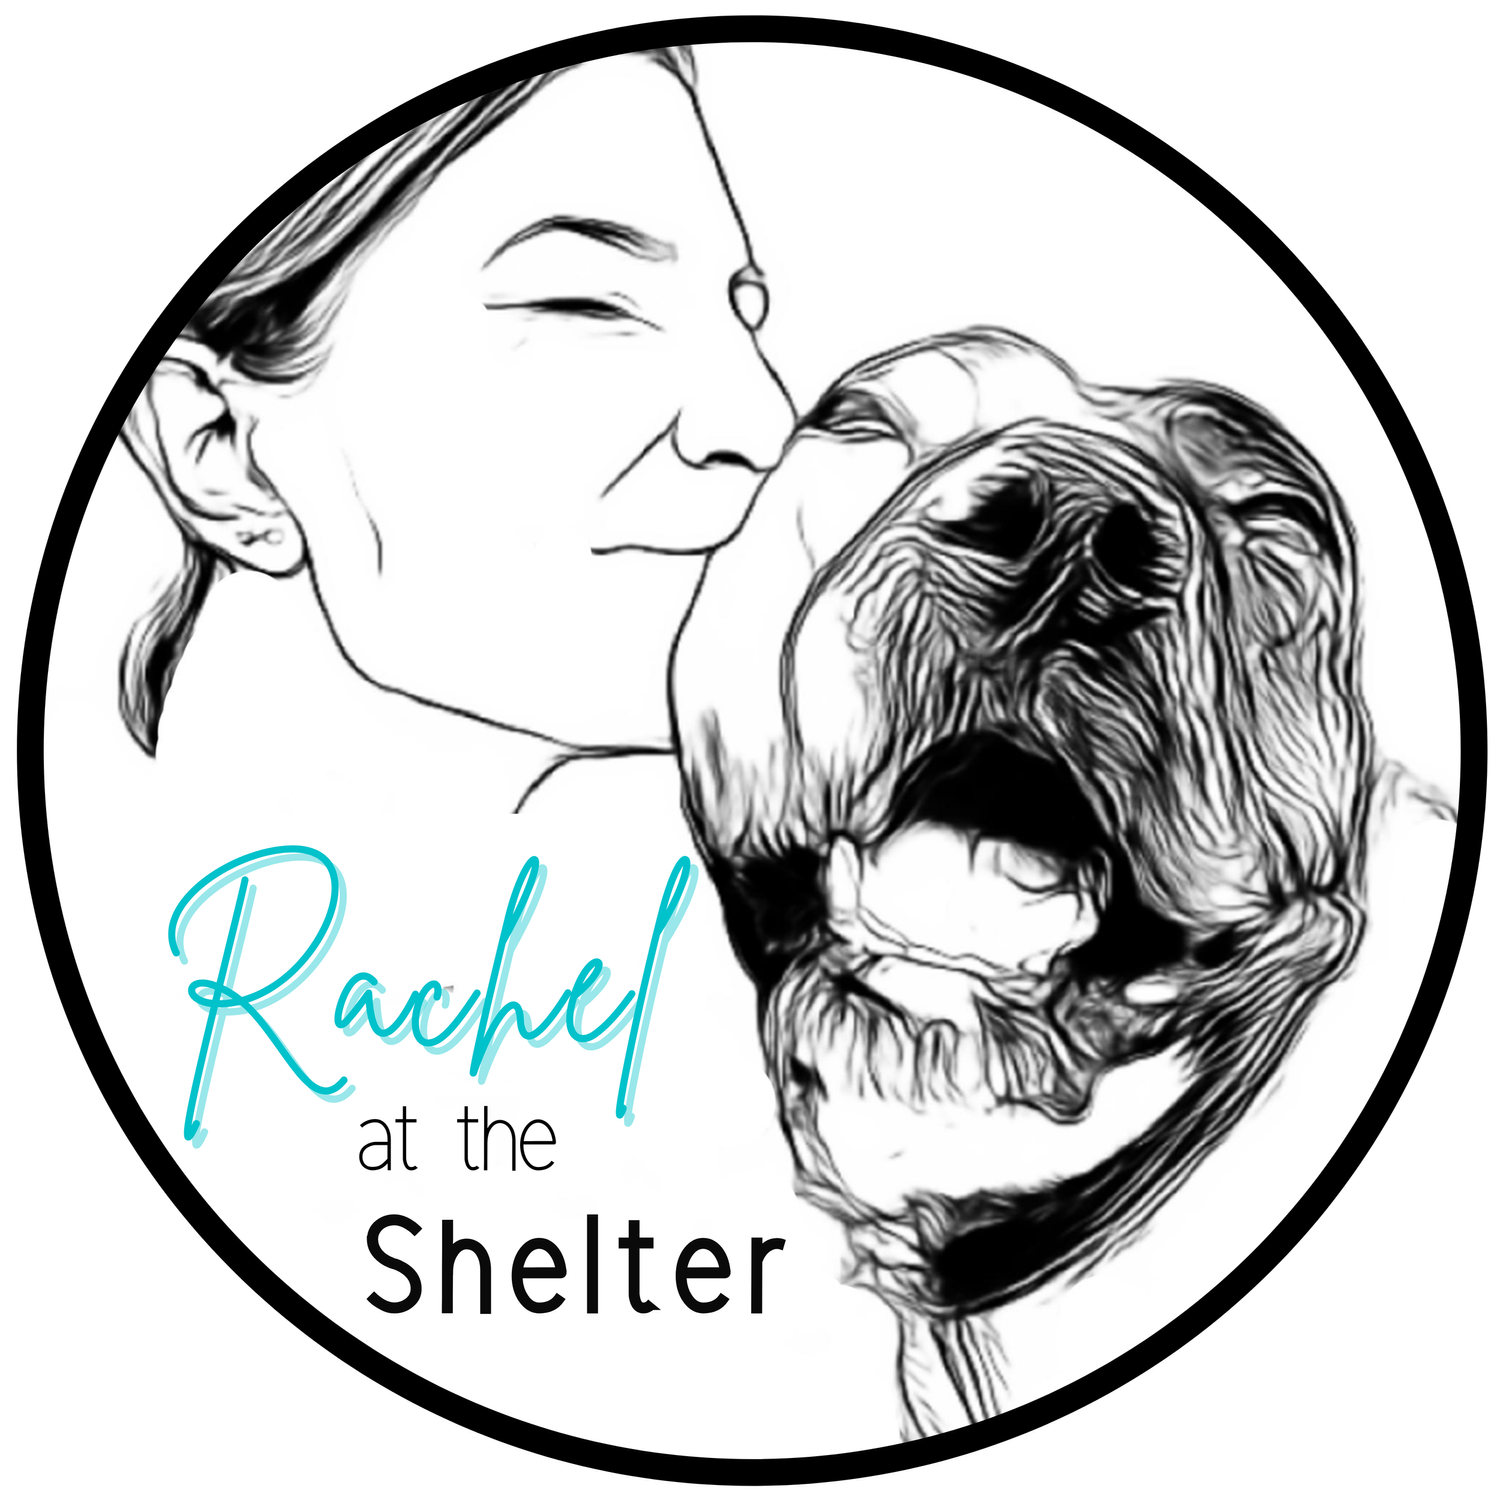 Rachel at the Shelter